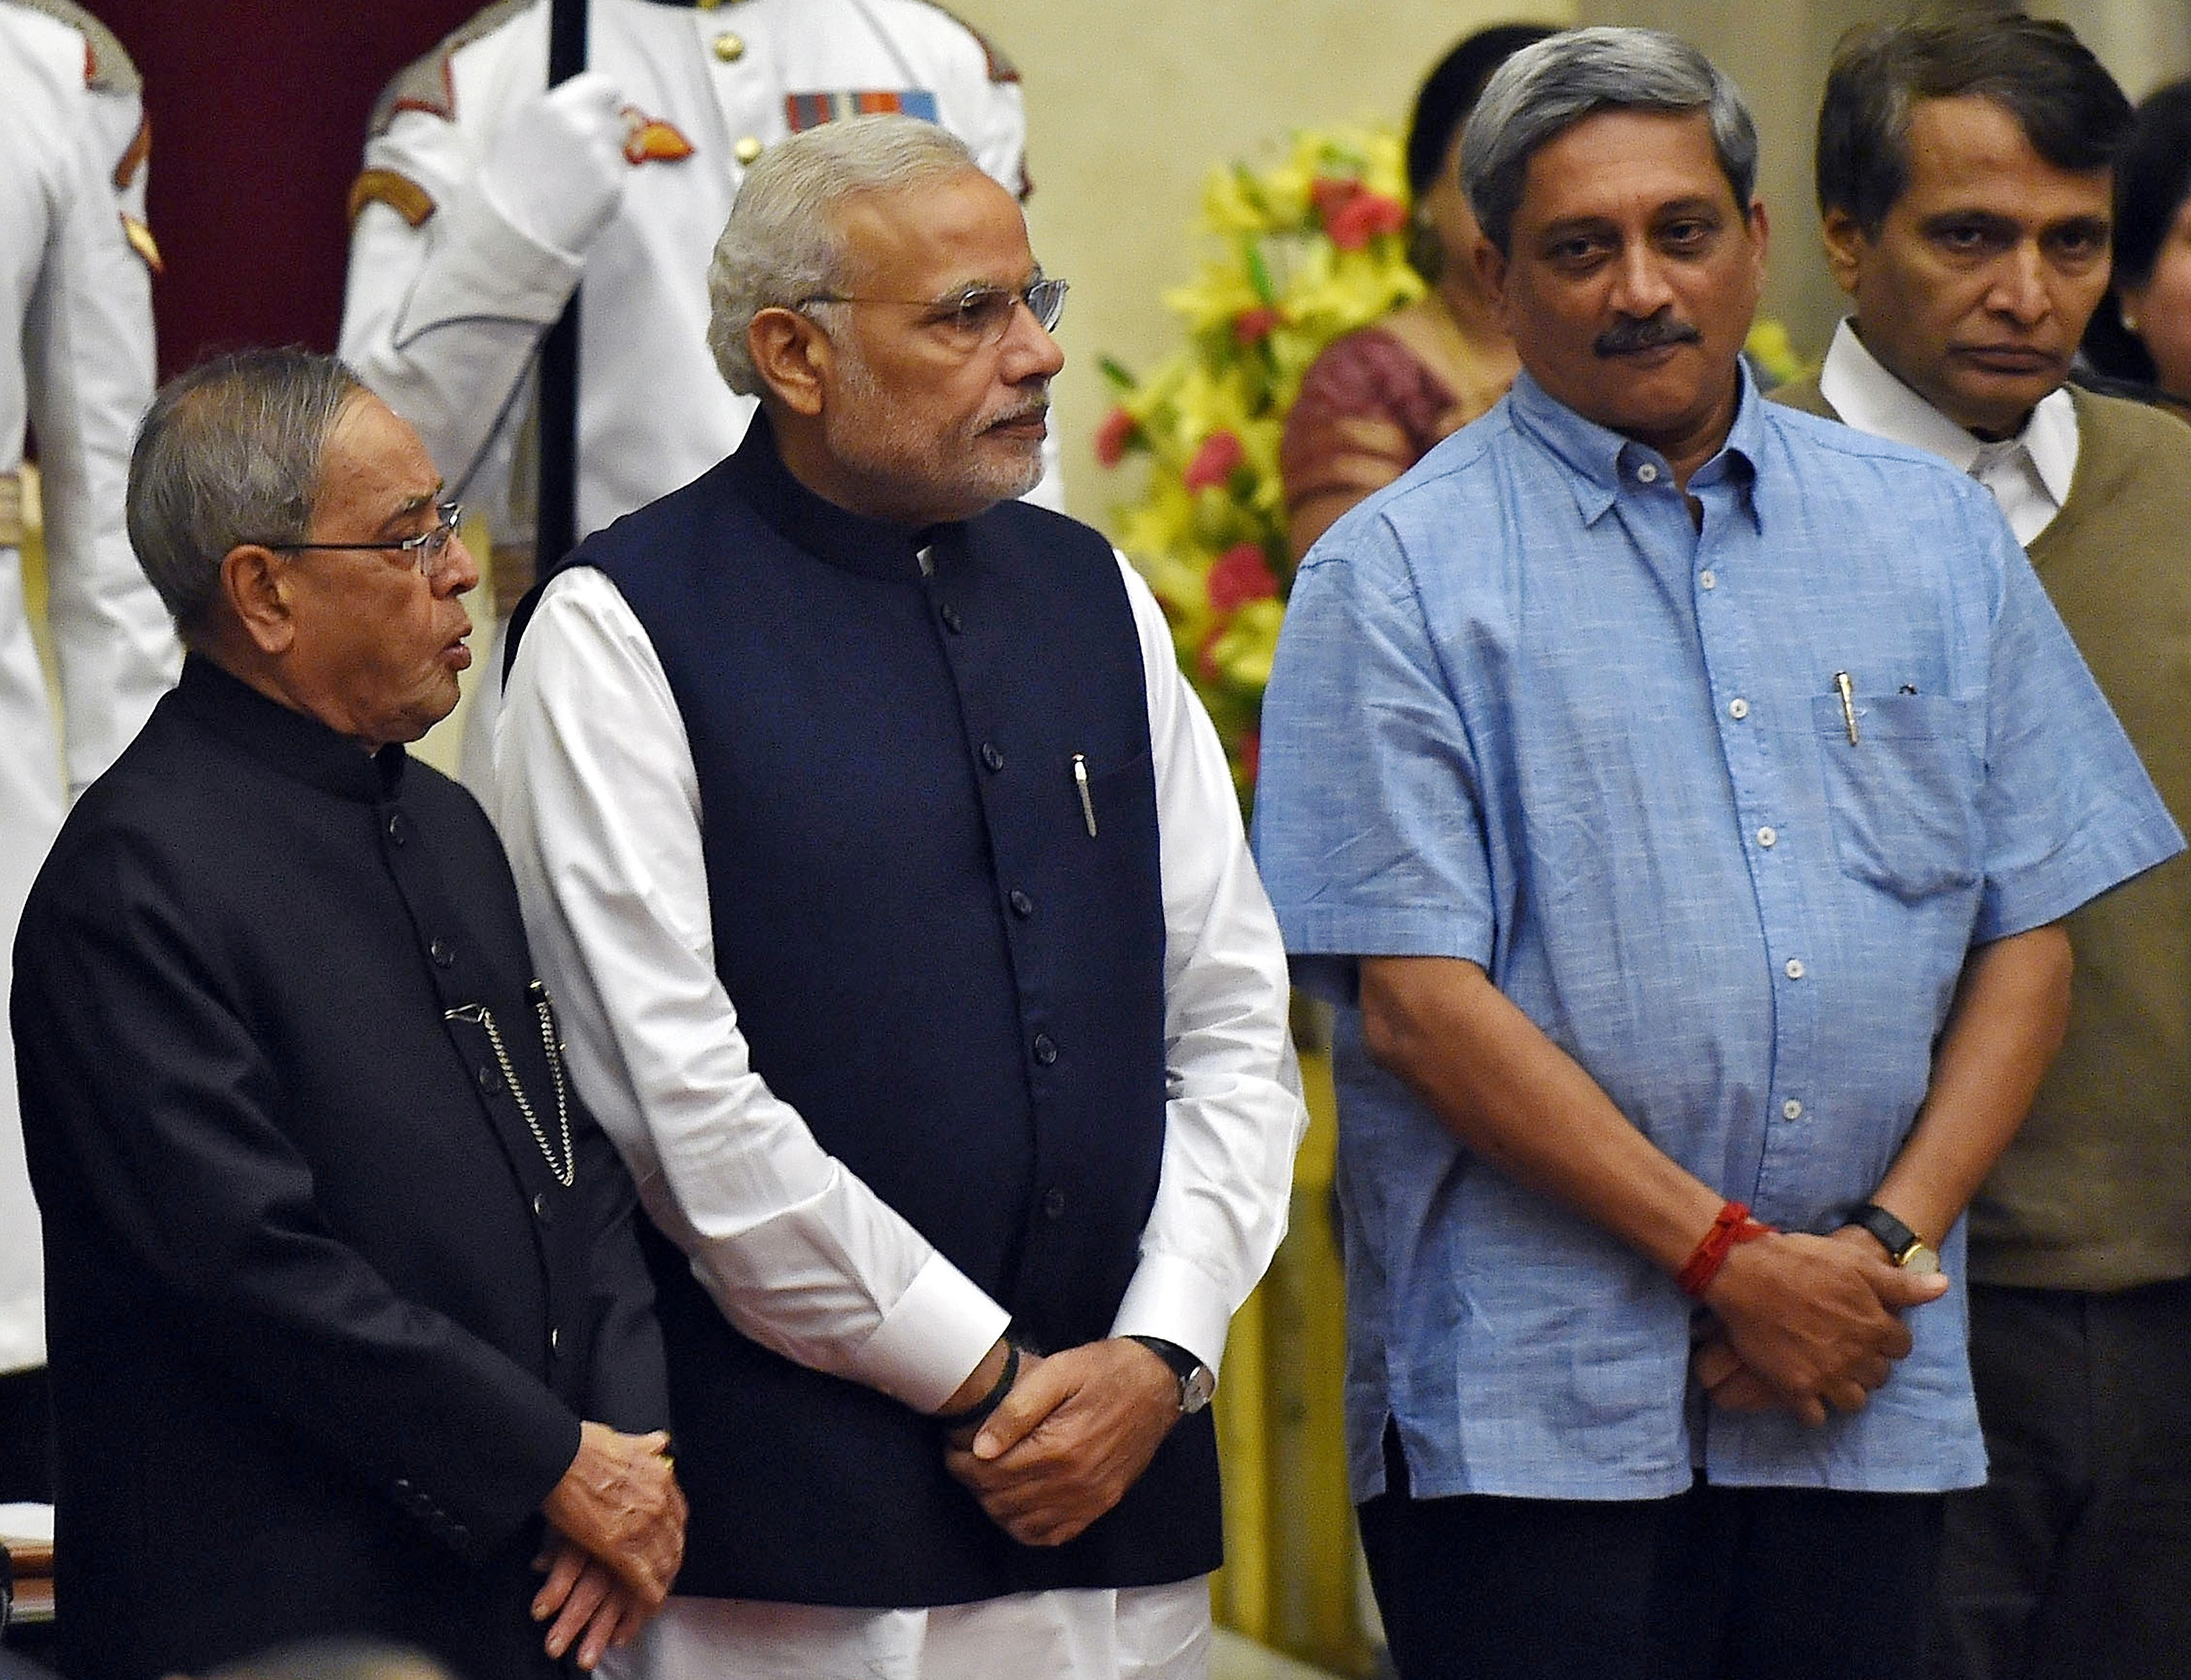 India's President Mukherjee, PM Modi, new cabinet ministers Manohar Parrikar and Suresh Prabhu pose after a swearing-in ceremony in New Delhi